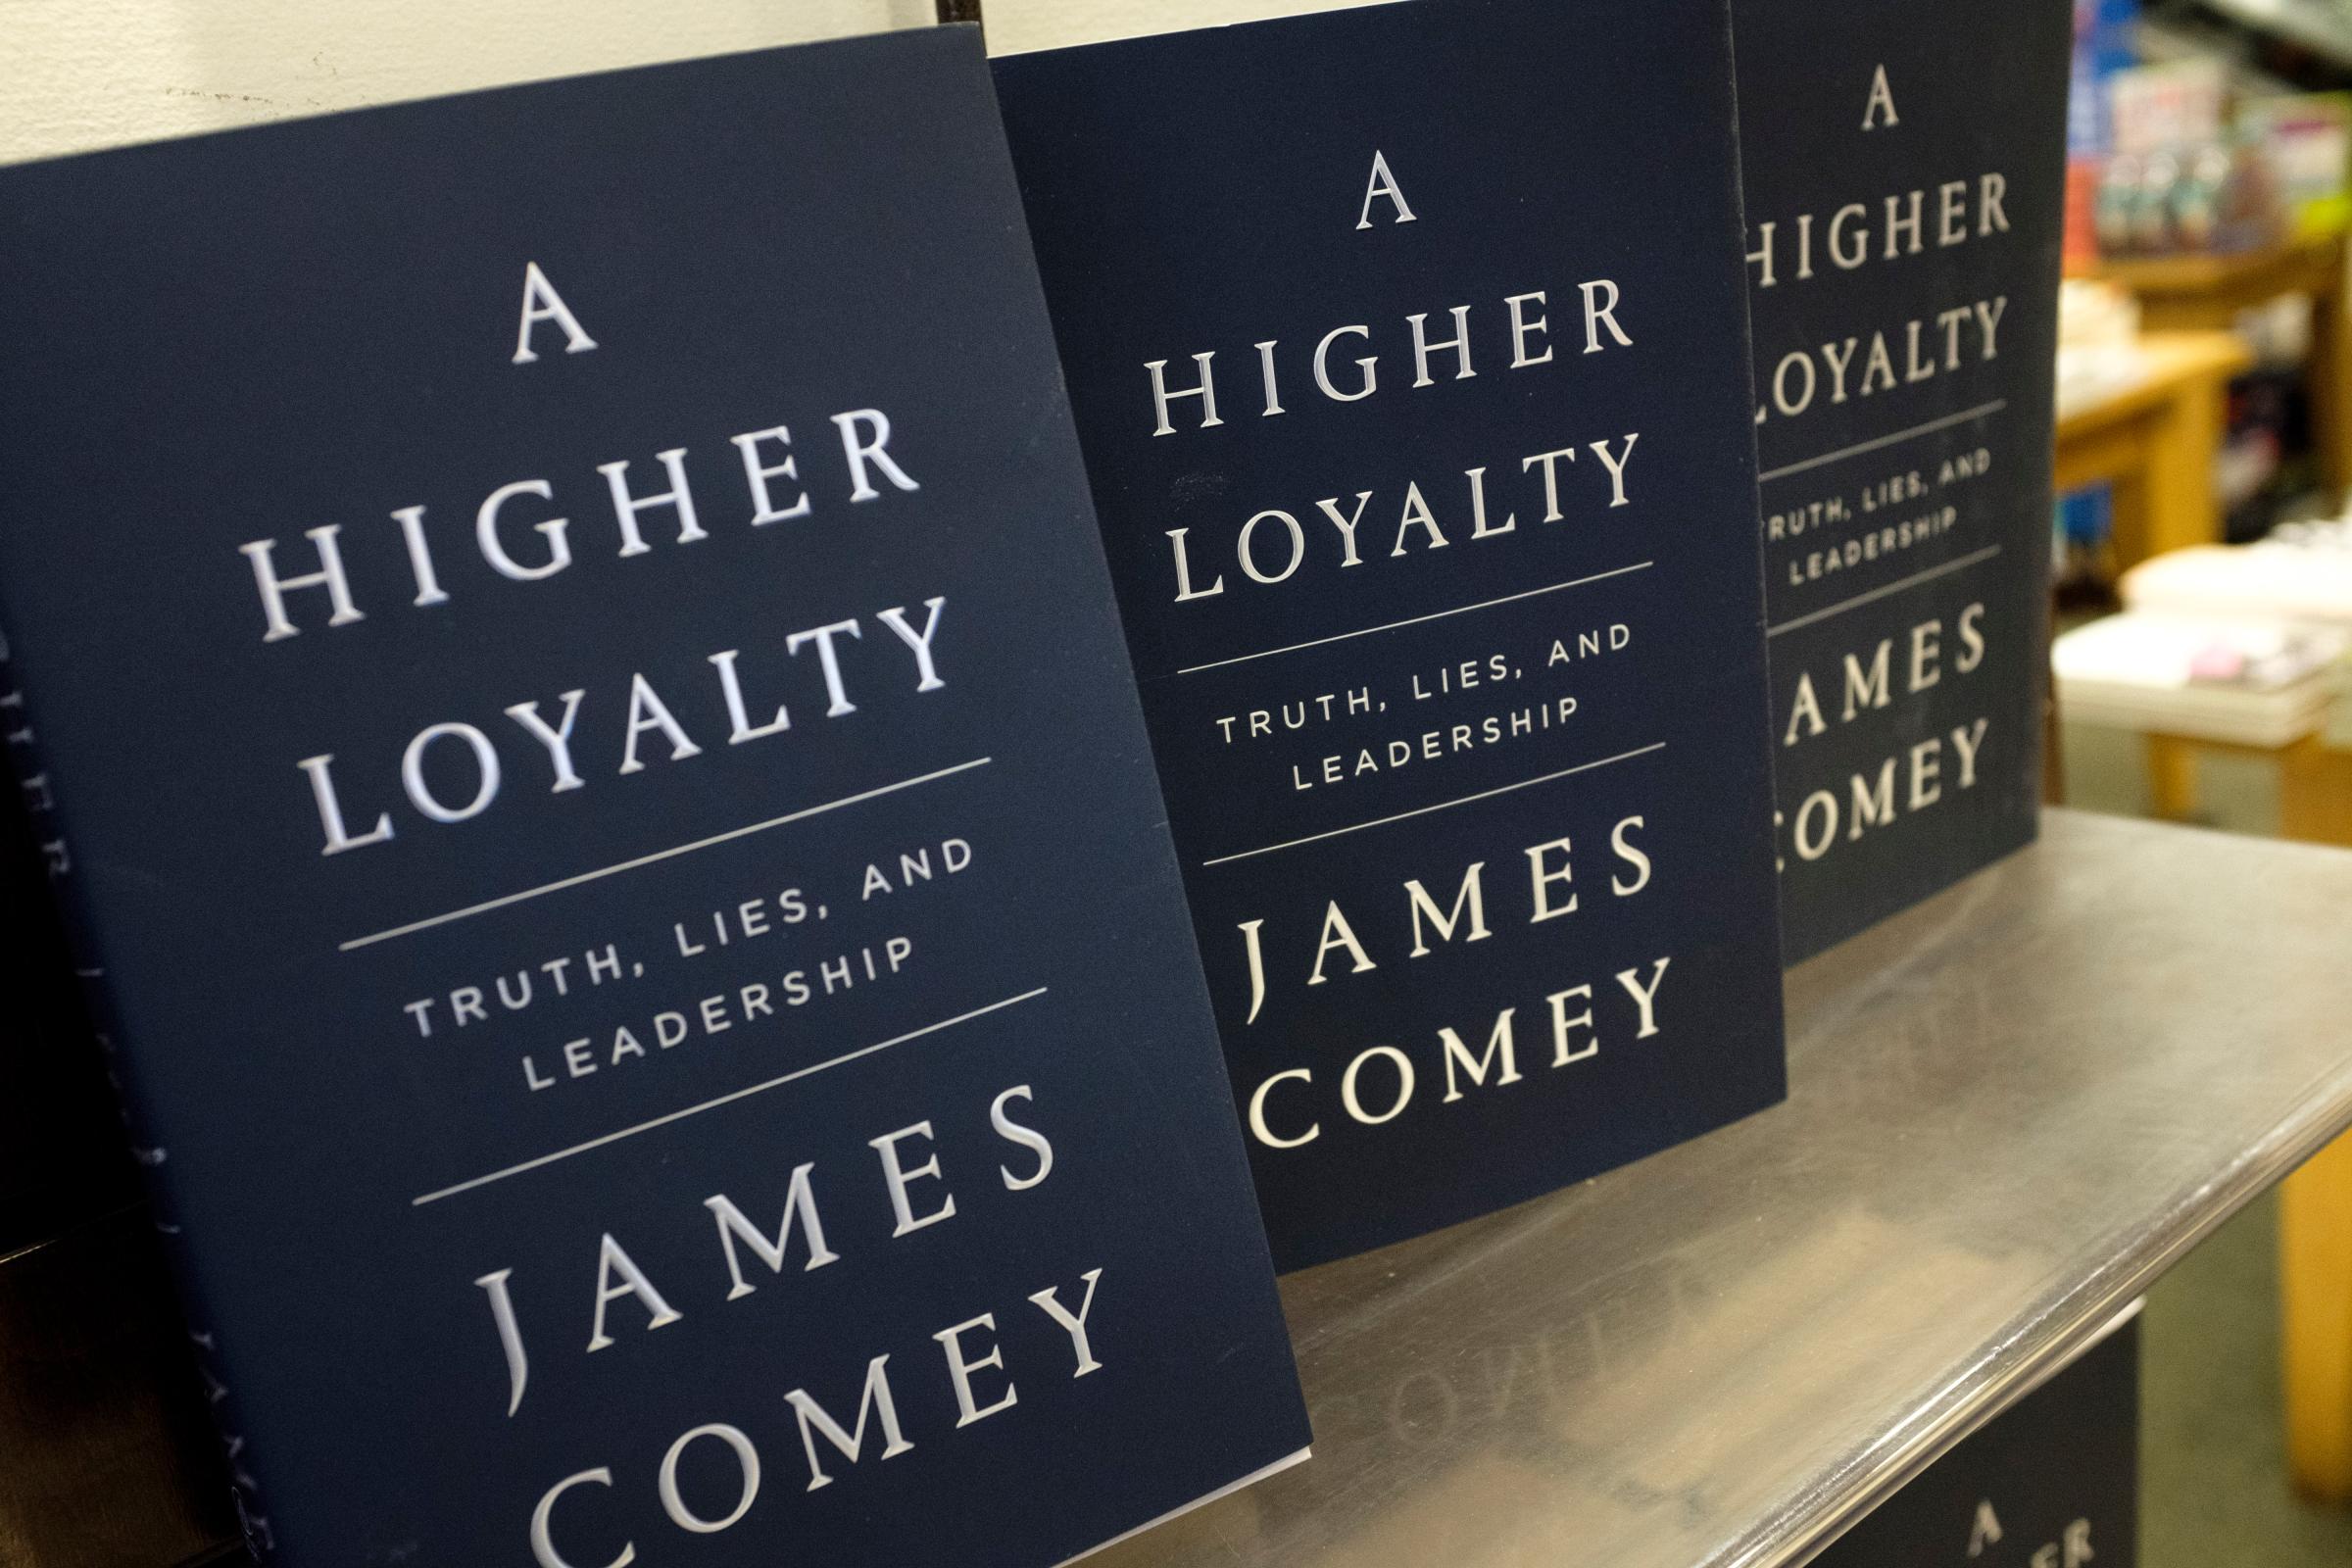 Former FBI Director James Comey's Book "A Higher Loyalty" Goes On Sale